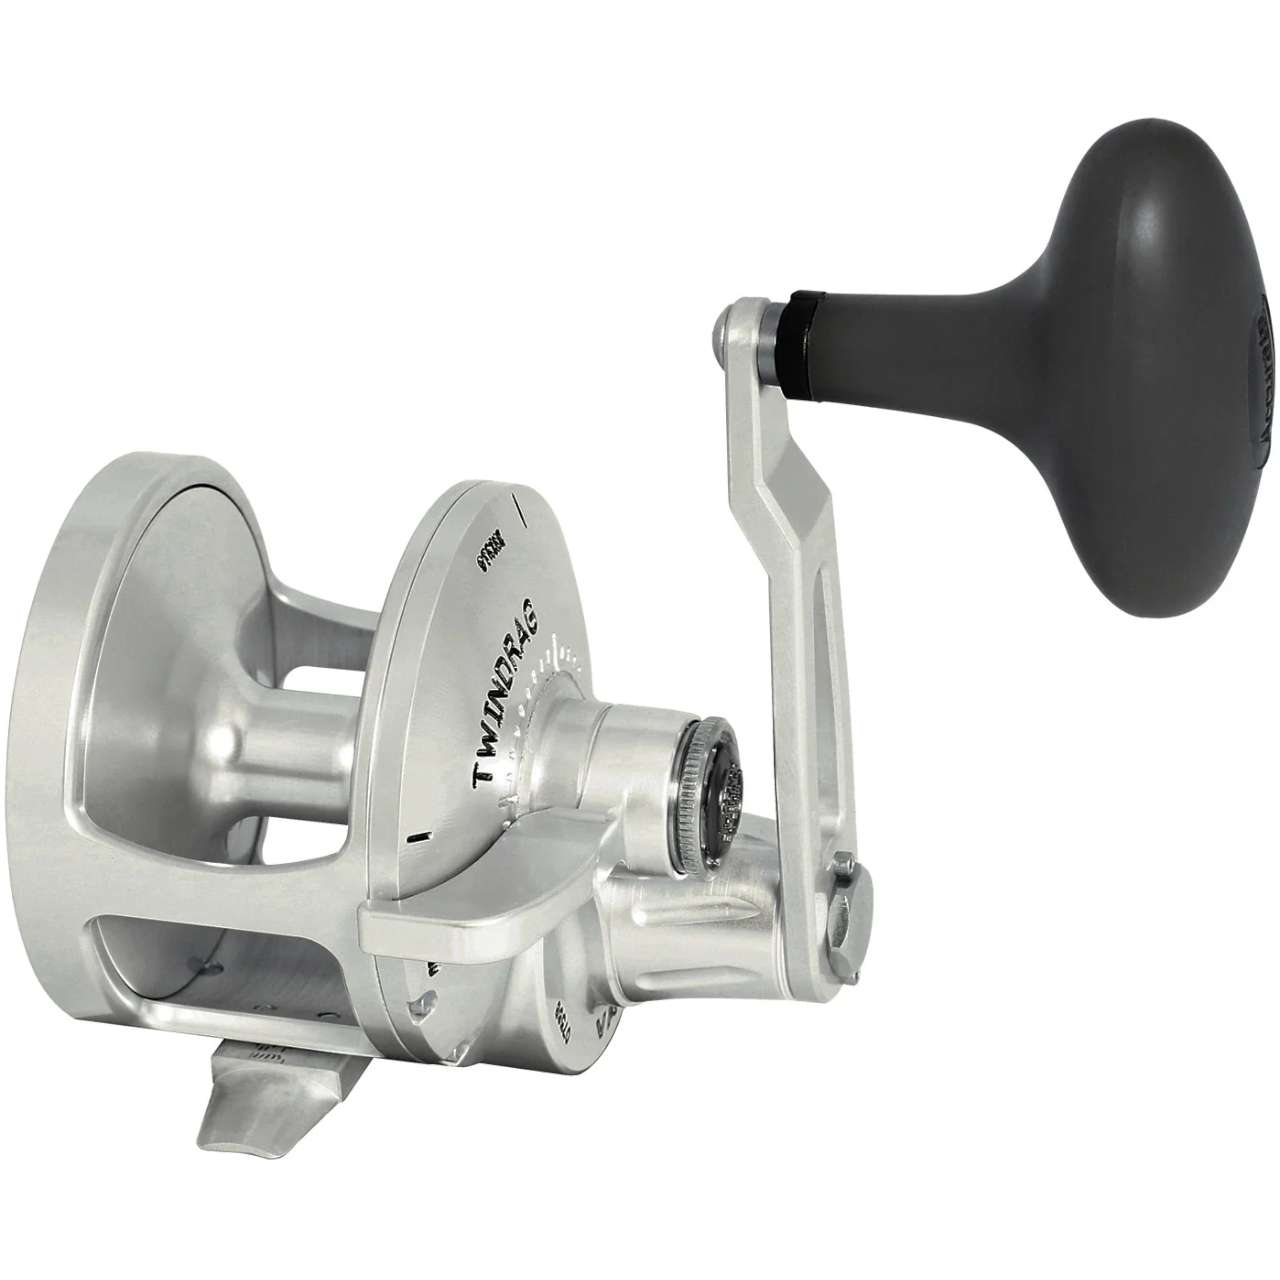 Accurate Boss Xtreme 30 Narrow Saltwater Fishing Reel